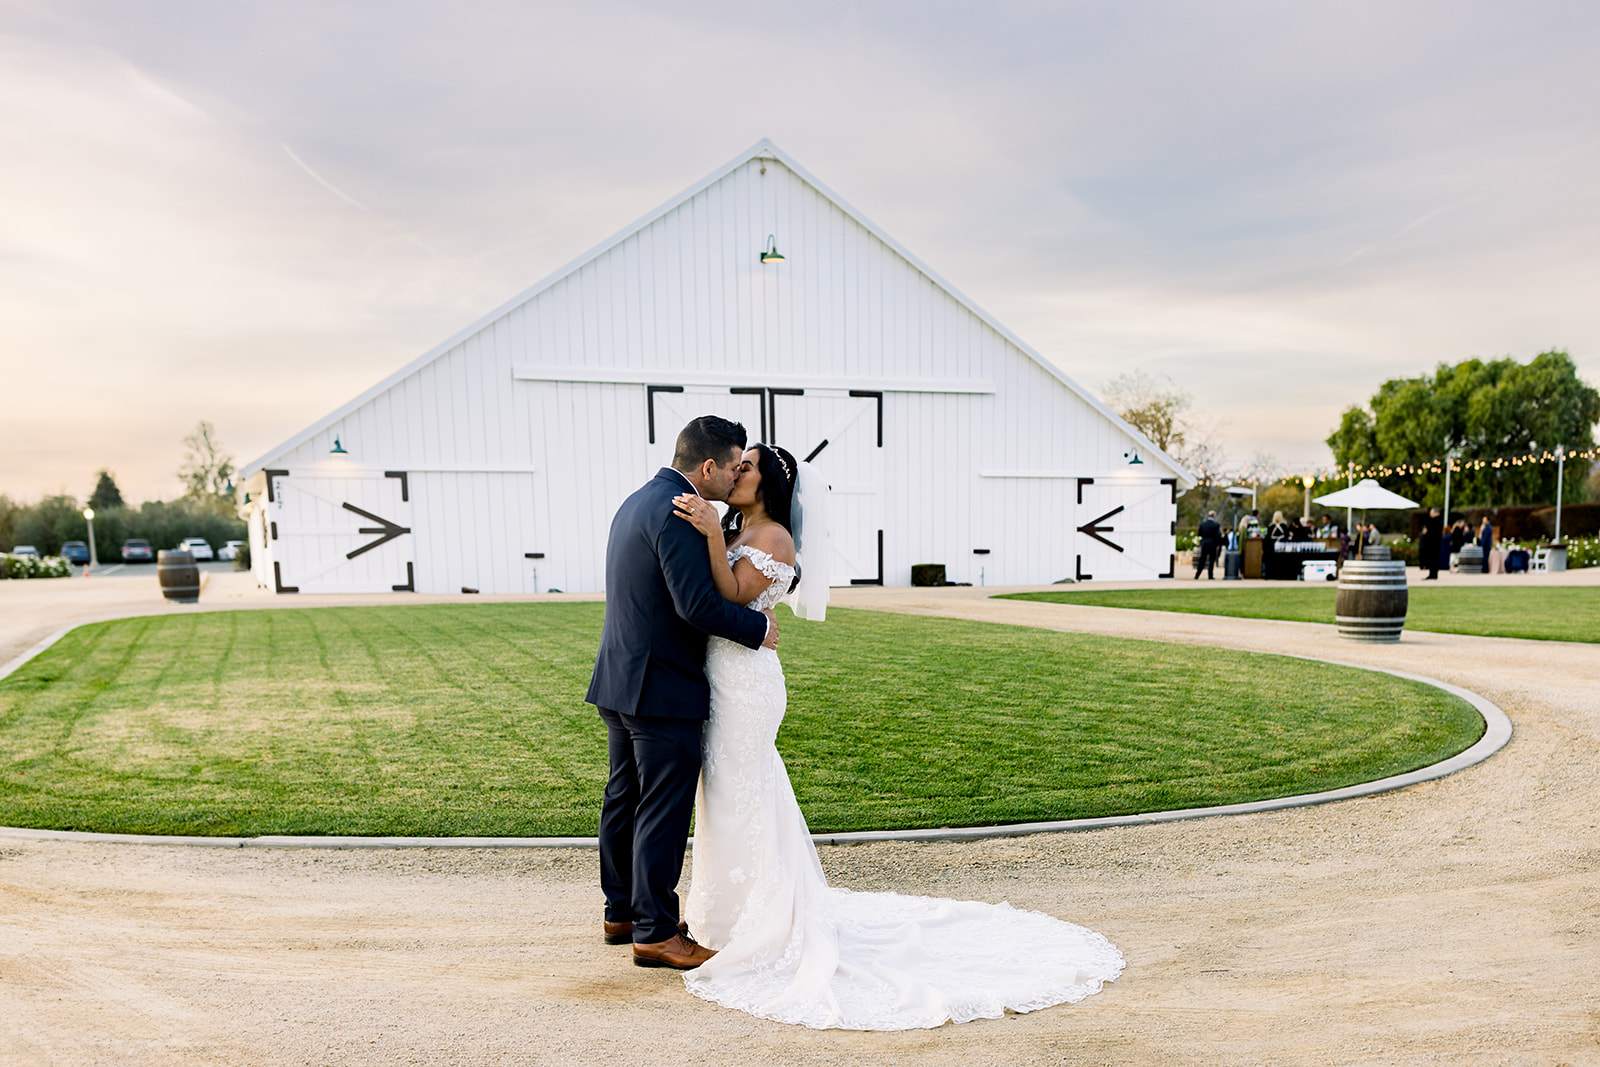 The White Barn's timeless appeal frames the couple as they exchange heartfelt vows, surrounded by loved ones